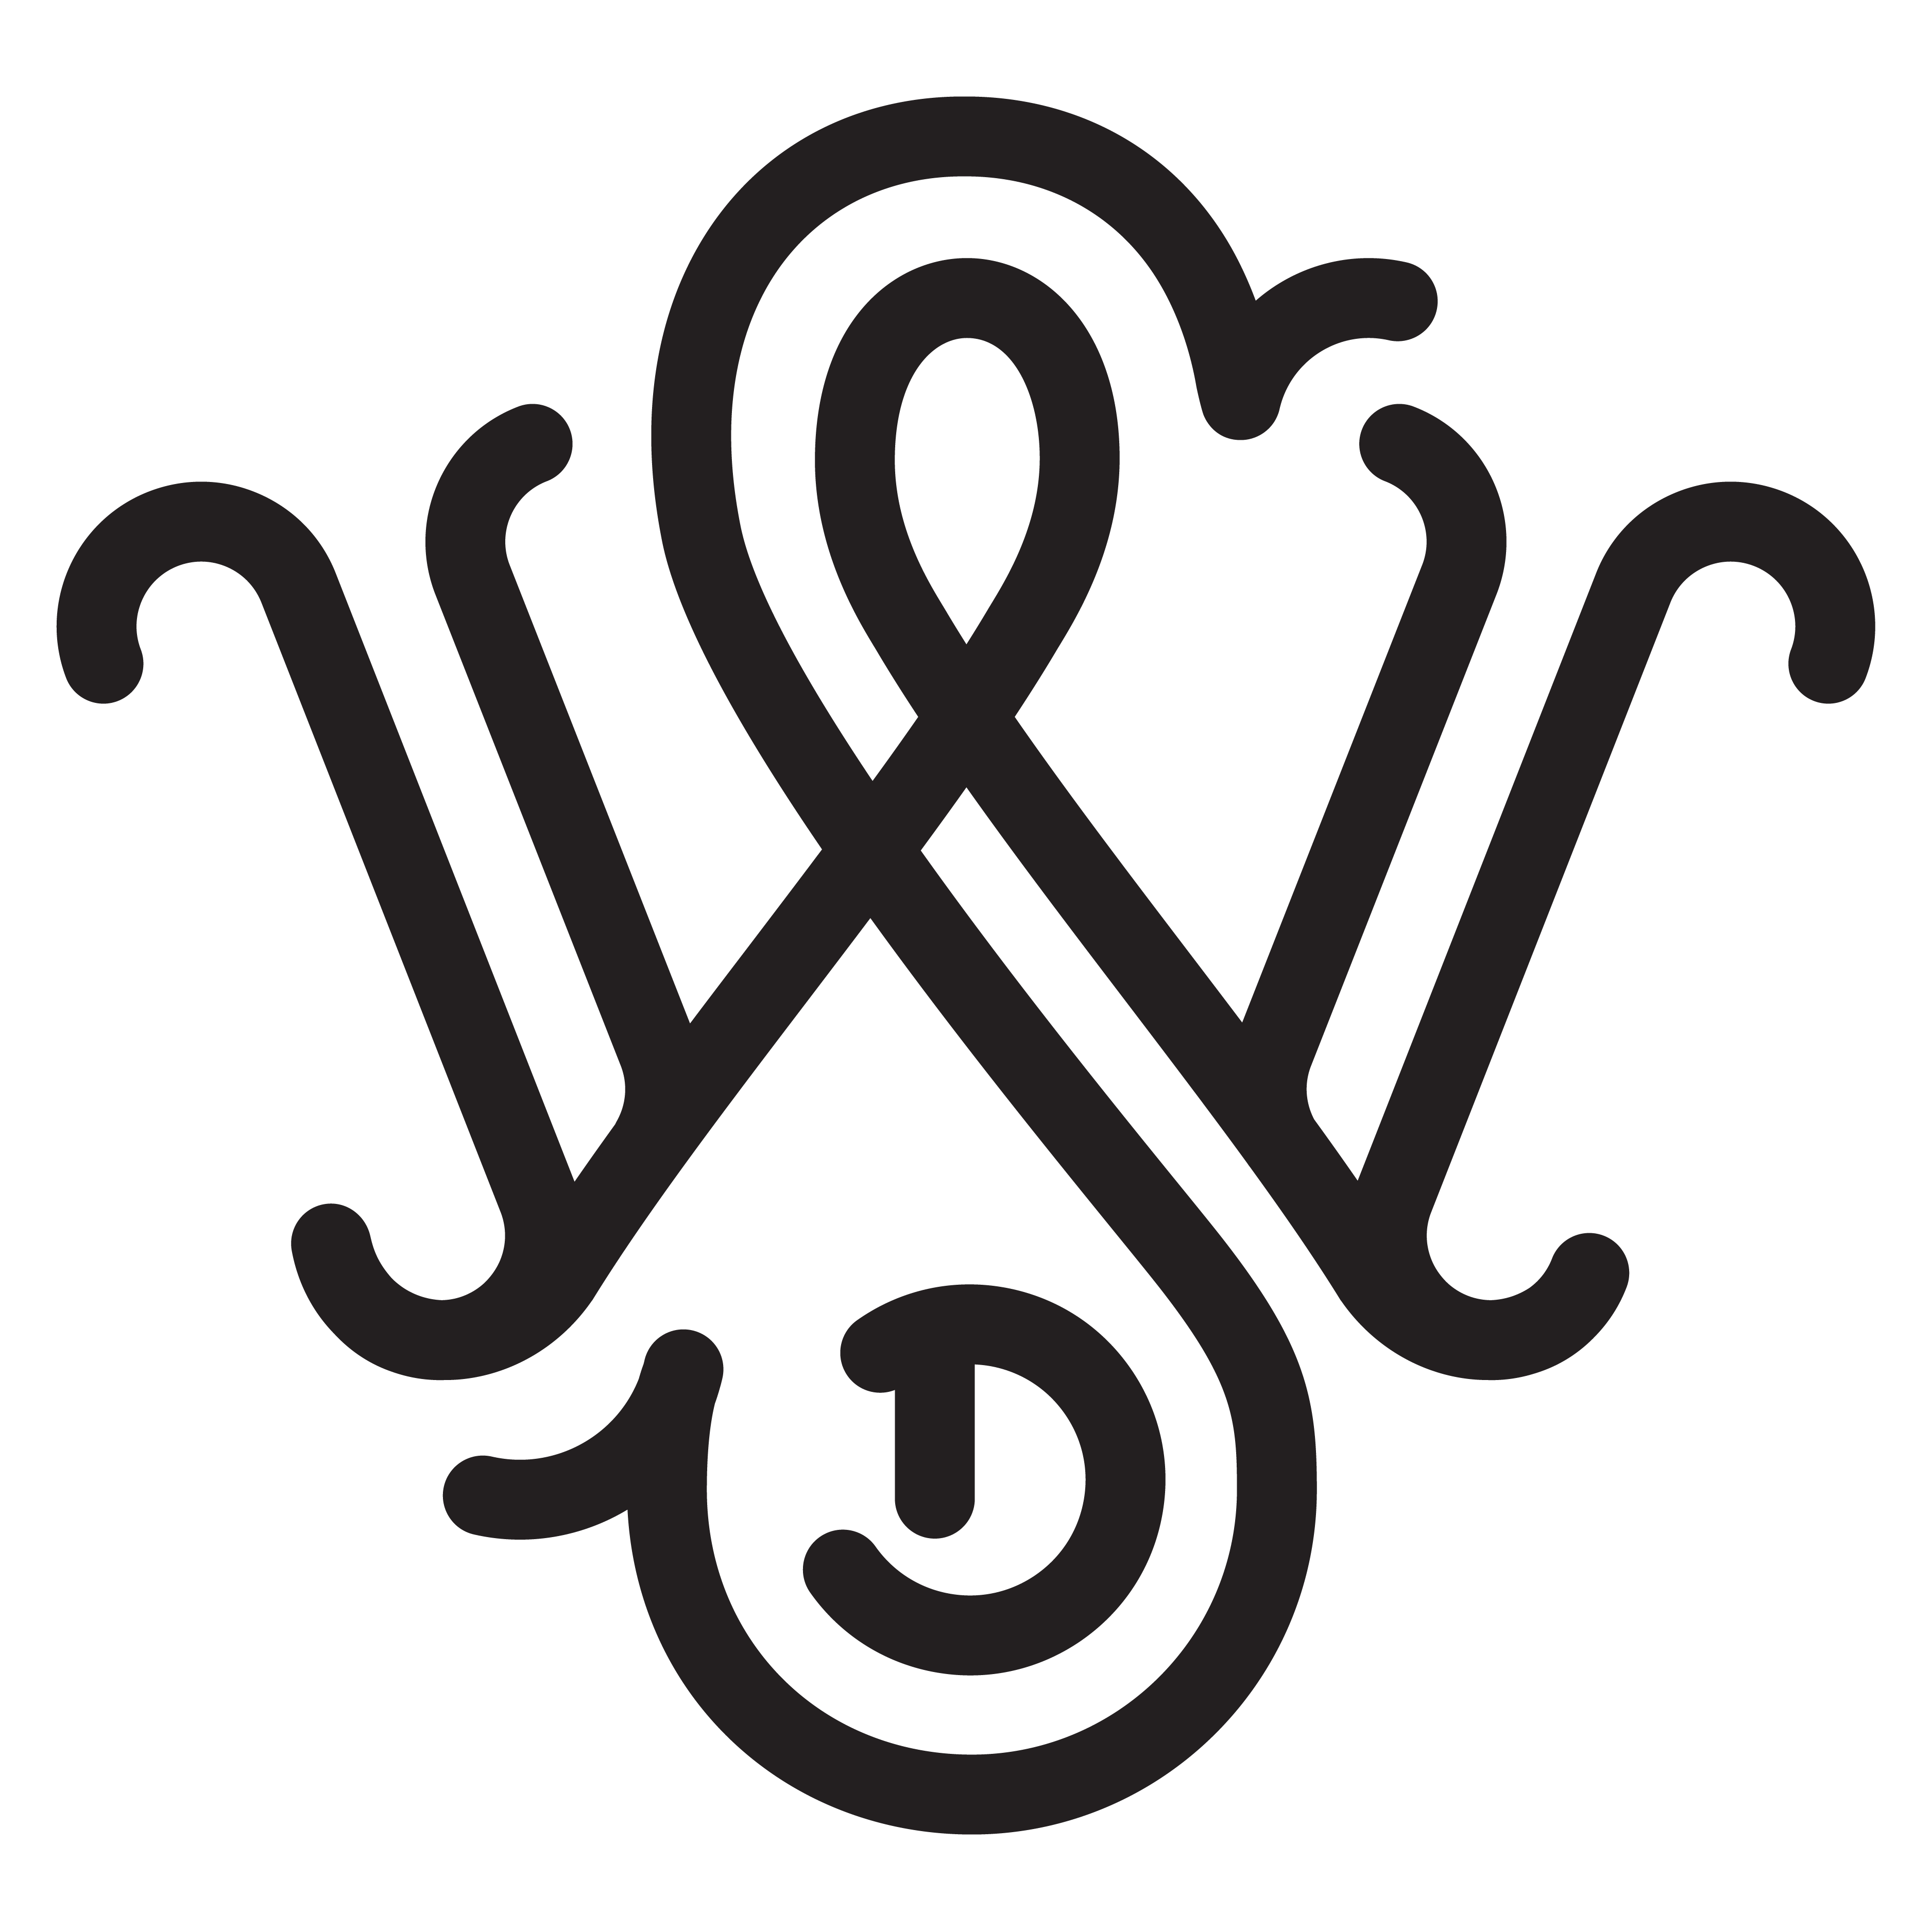 WSD Monogram logo design by logo designer Zendoke for your inspiration and for the worlds largest logo competition